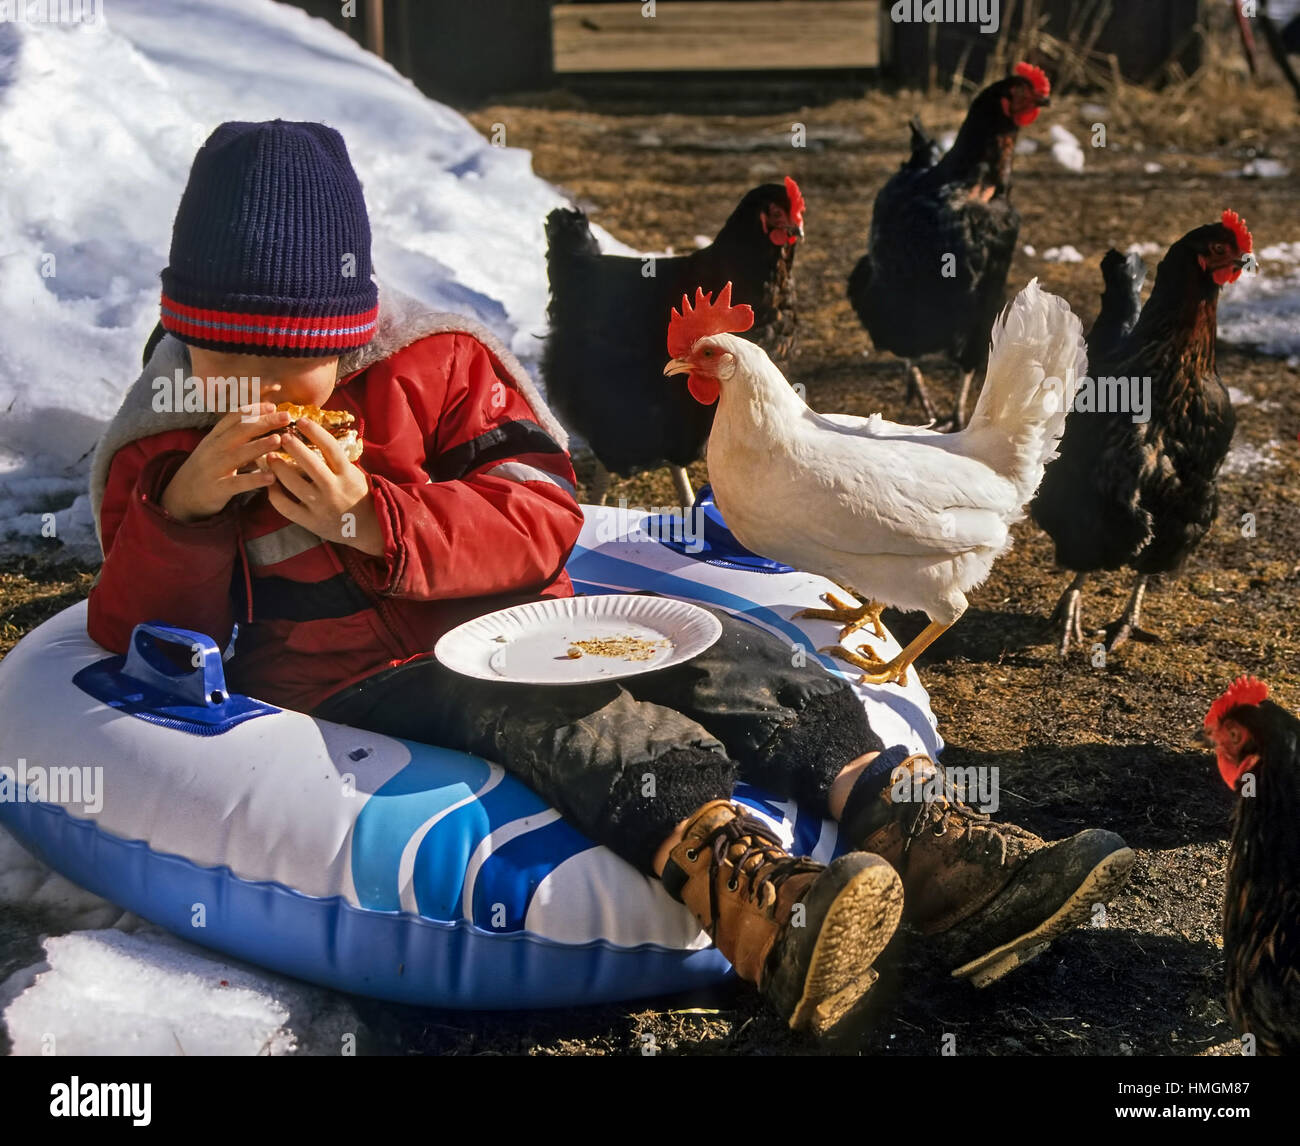 Hungry white rooster tries to get food from a four year old boy eating a hamburger. Stock Photo